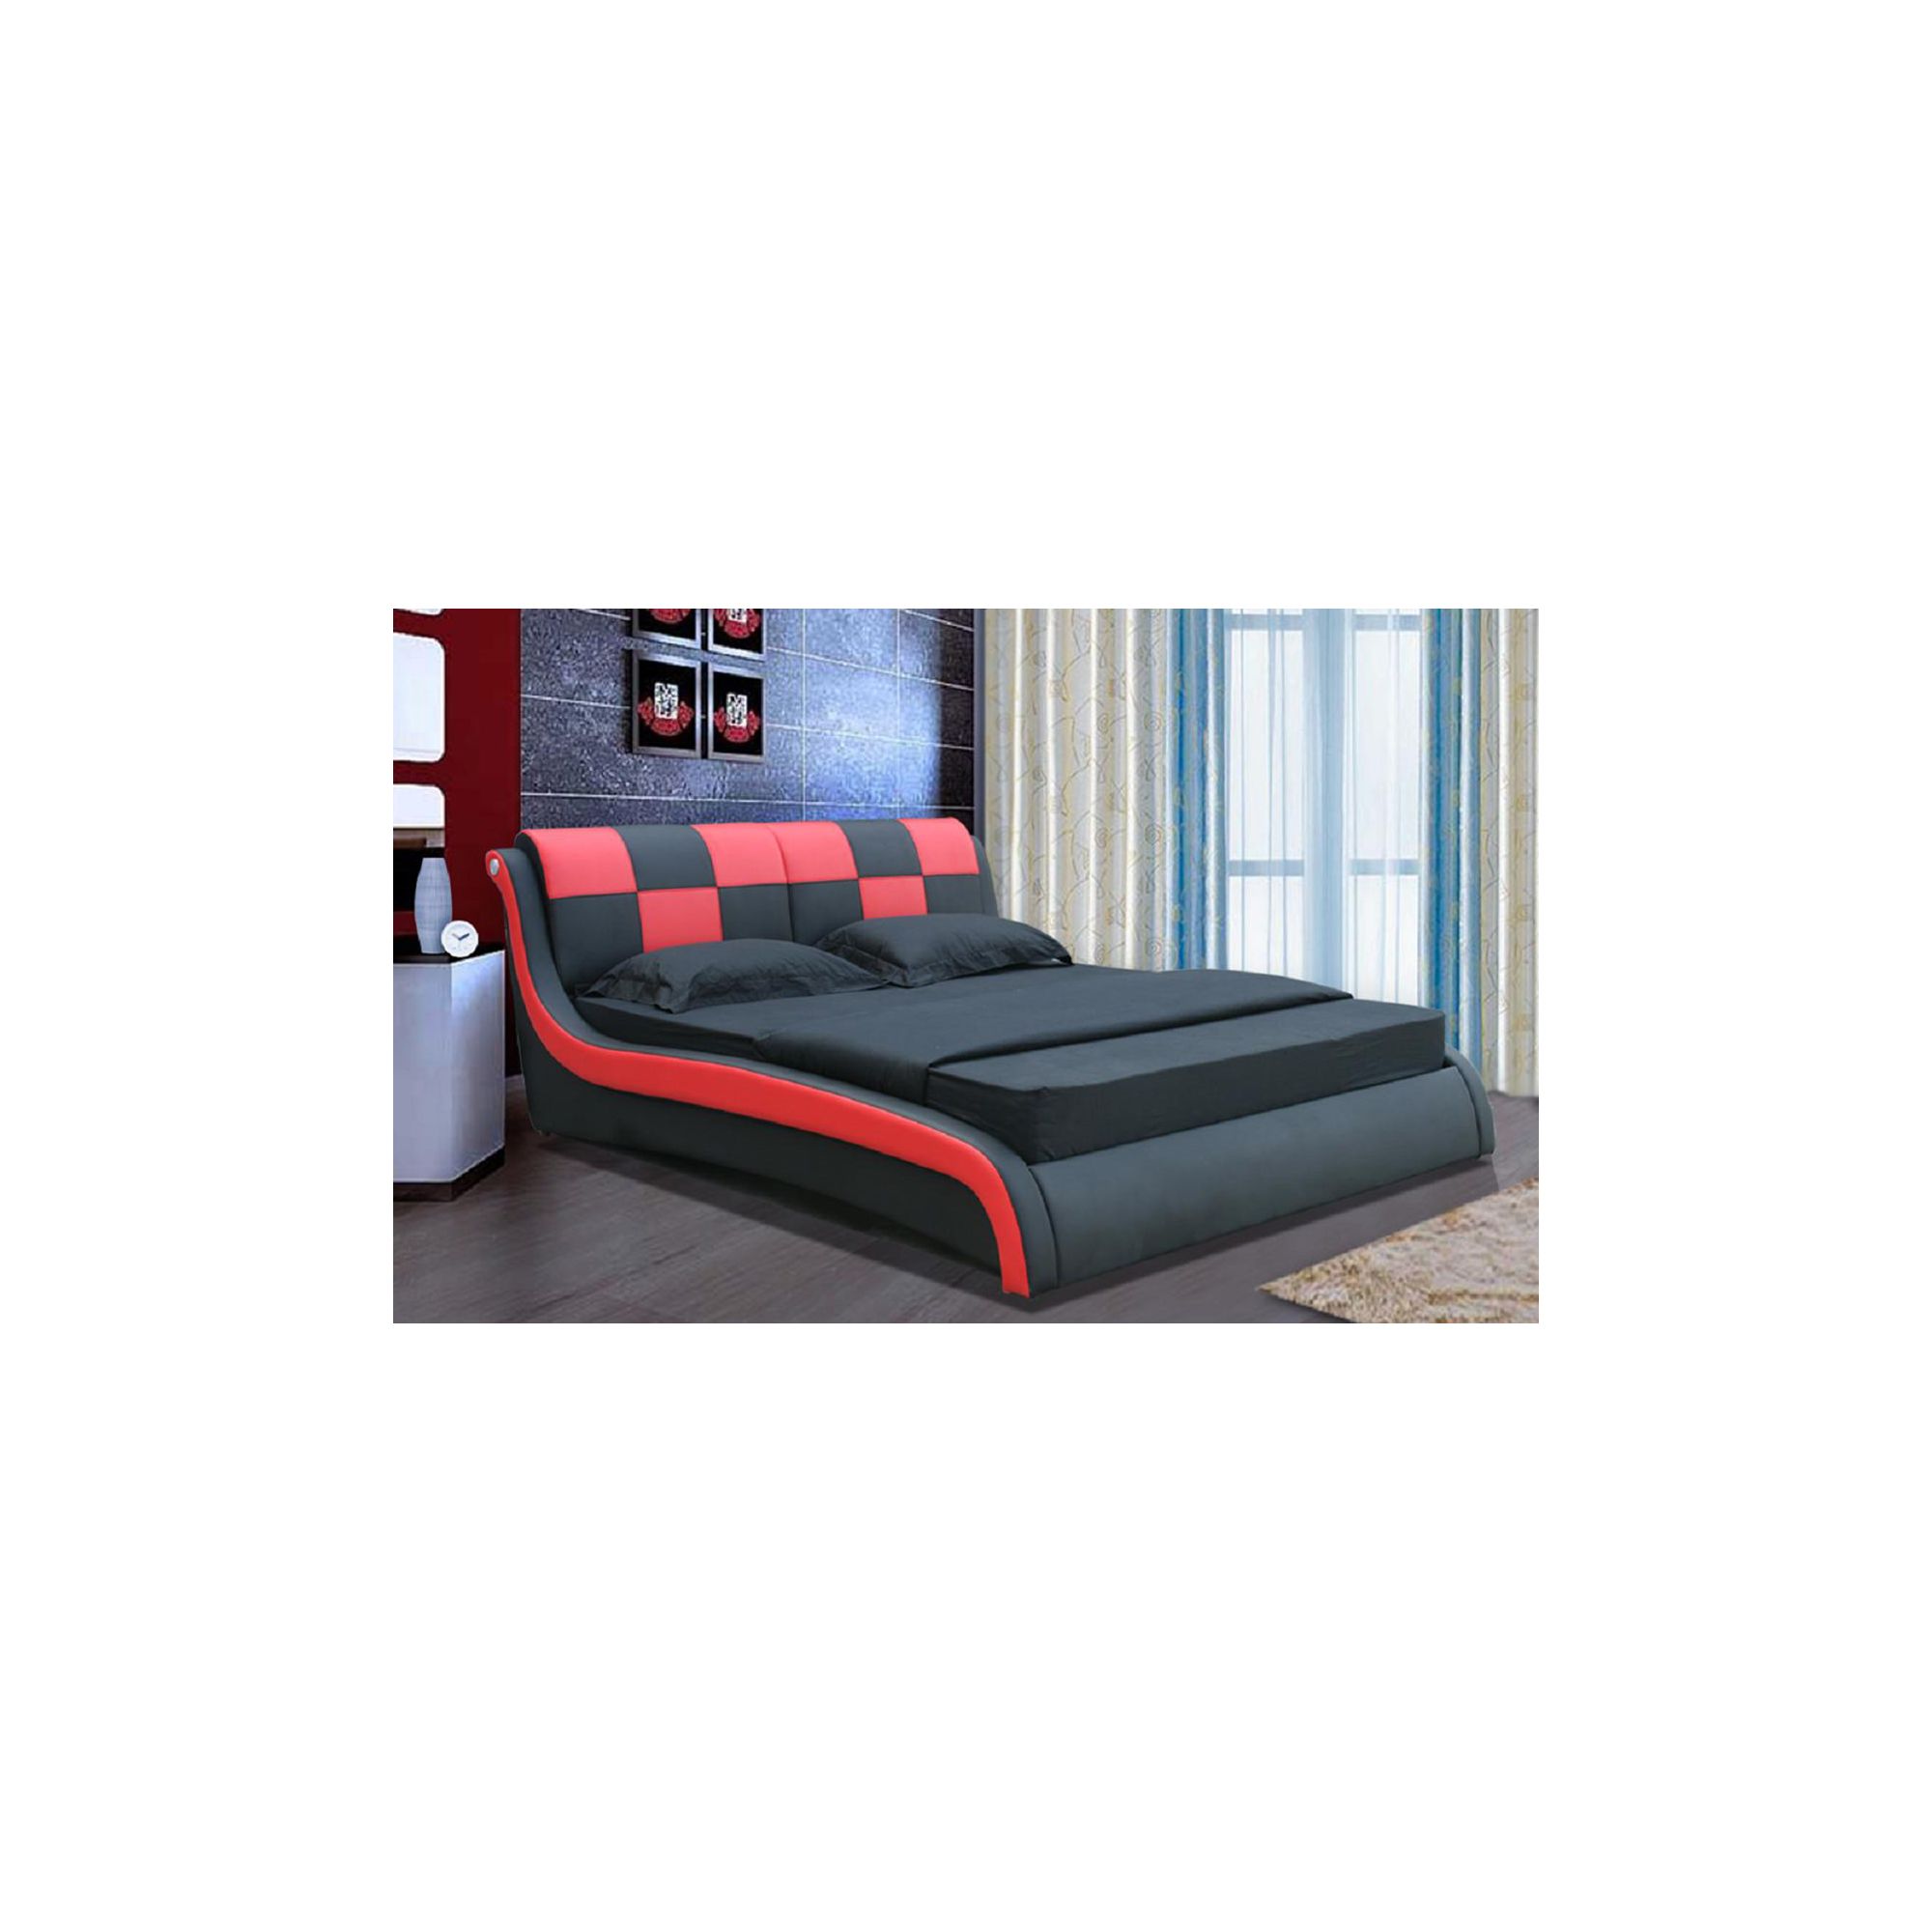 Giomani Designs Designer Check Bed - Red / Black - Double at Tescos Direct